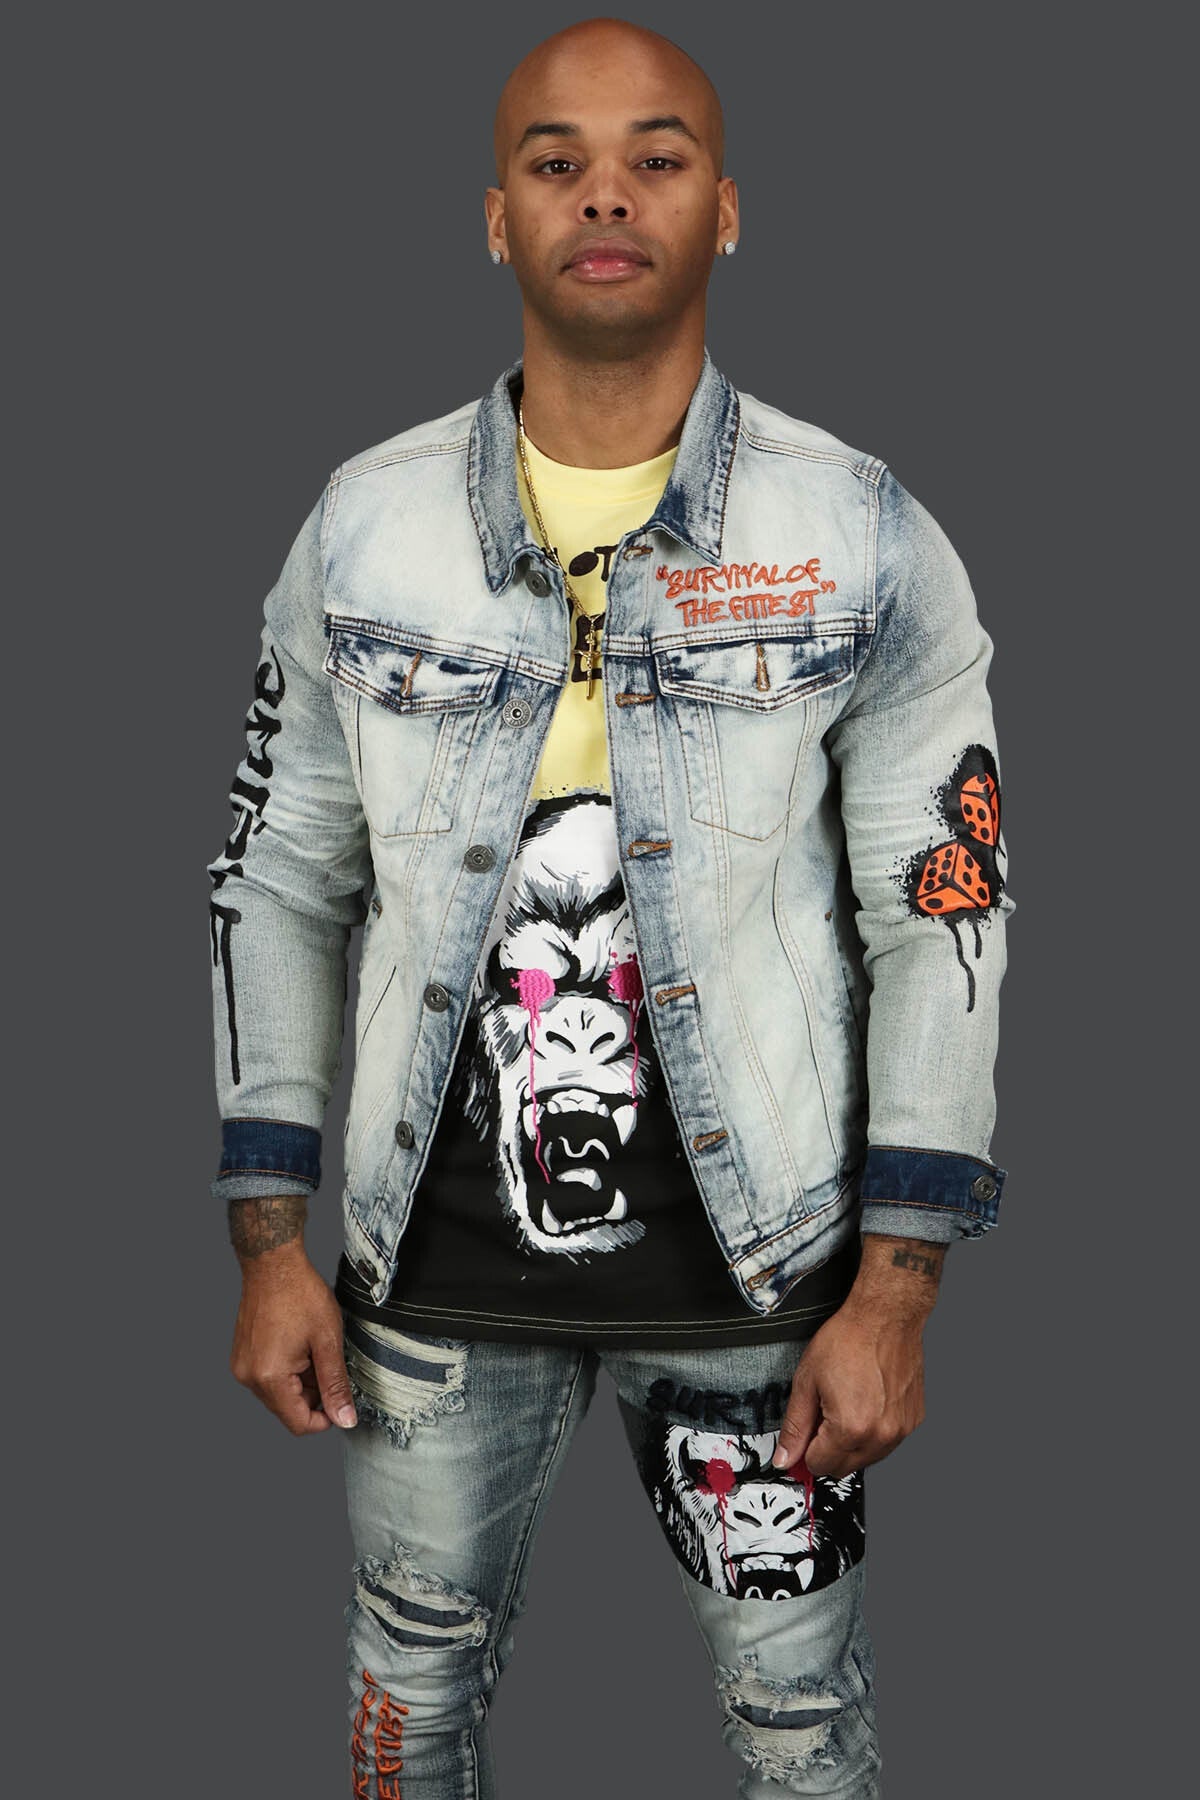 The front of the Only The Strong Custom Spray Painted Denim Jacket Motive Denim | Vintage |  with matching Only The Strong Graphic Tee fromMotive Denim and Motive Denim Custom Graphic Denim Jeans.